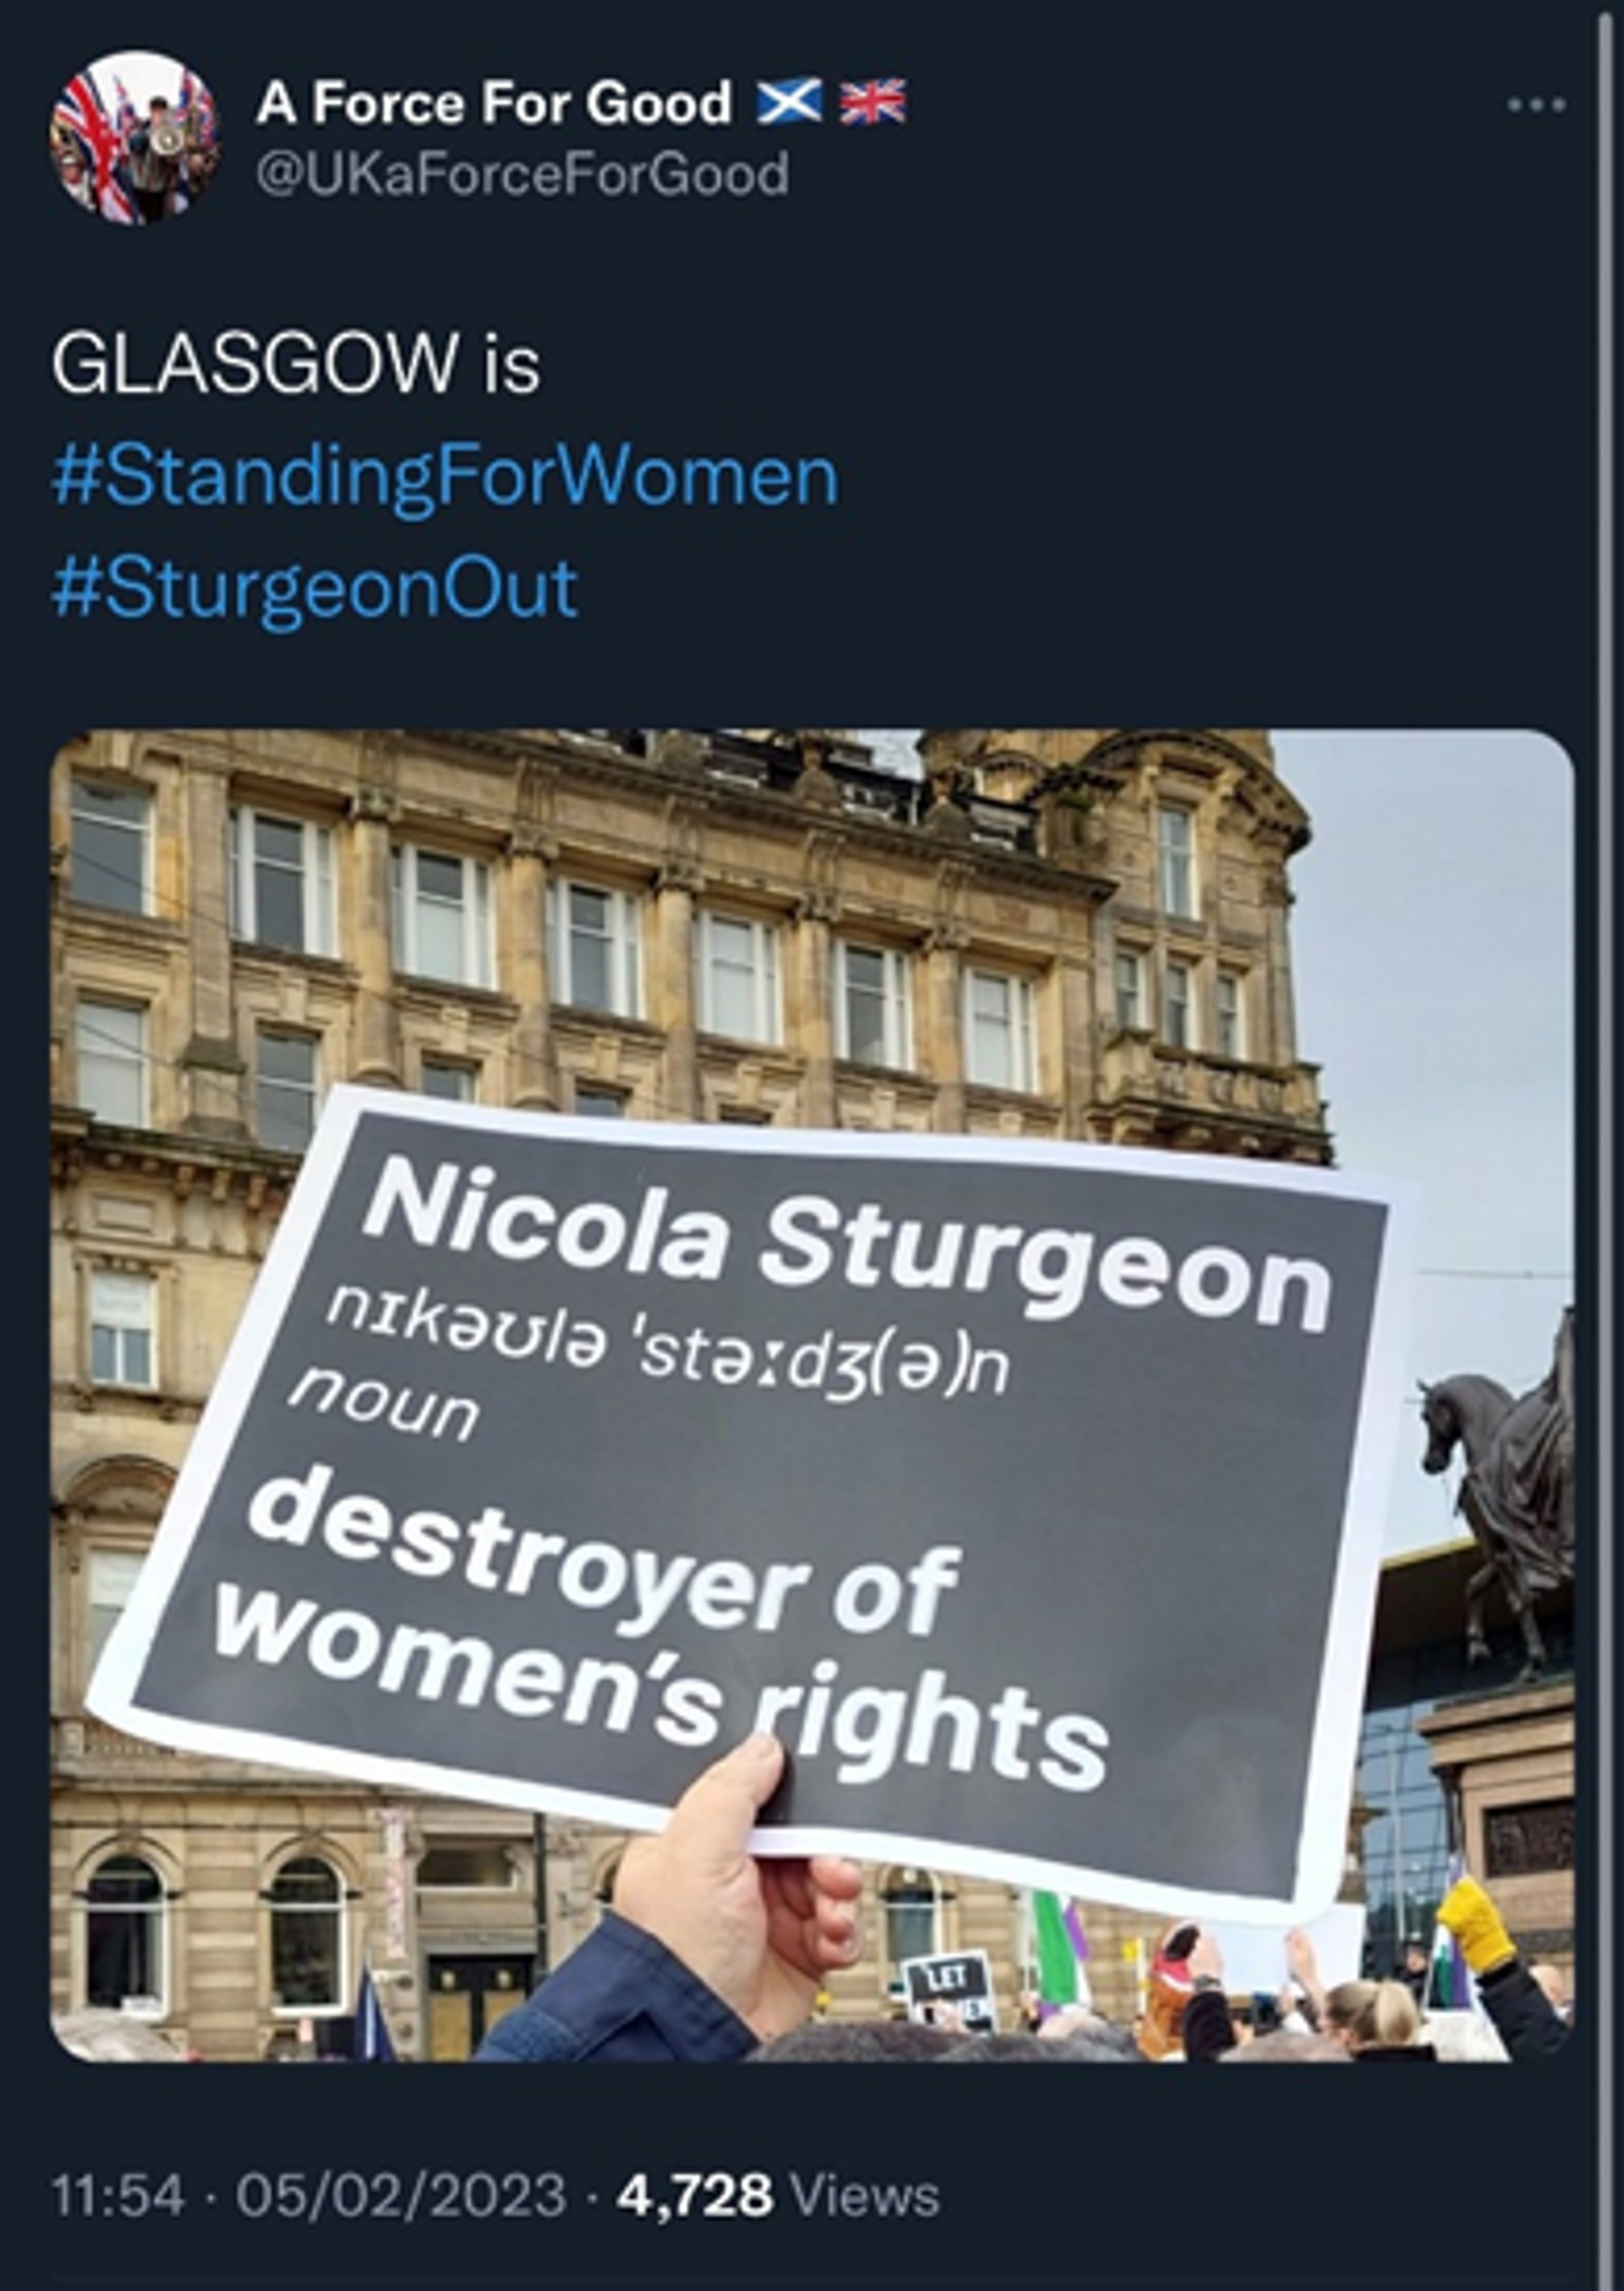 Tweet screenshot: A Force For Good tweets: GLASGOW is #StandingForWomen #SturgeonOut. Photo displays a Standing for Women placard, saying Nicola Sturgeon, destroyer of women's rights